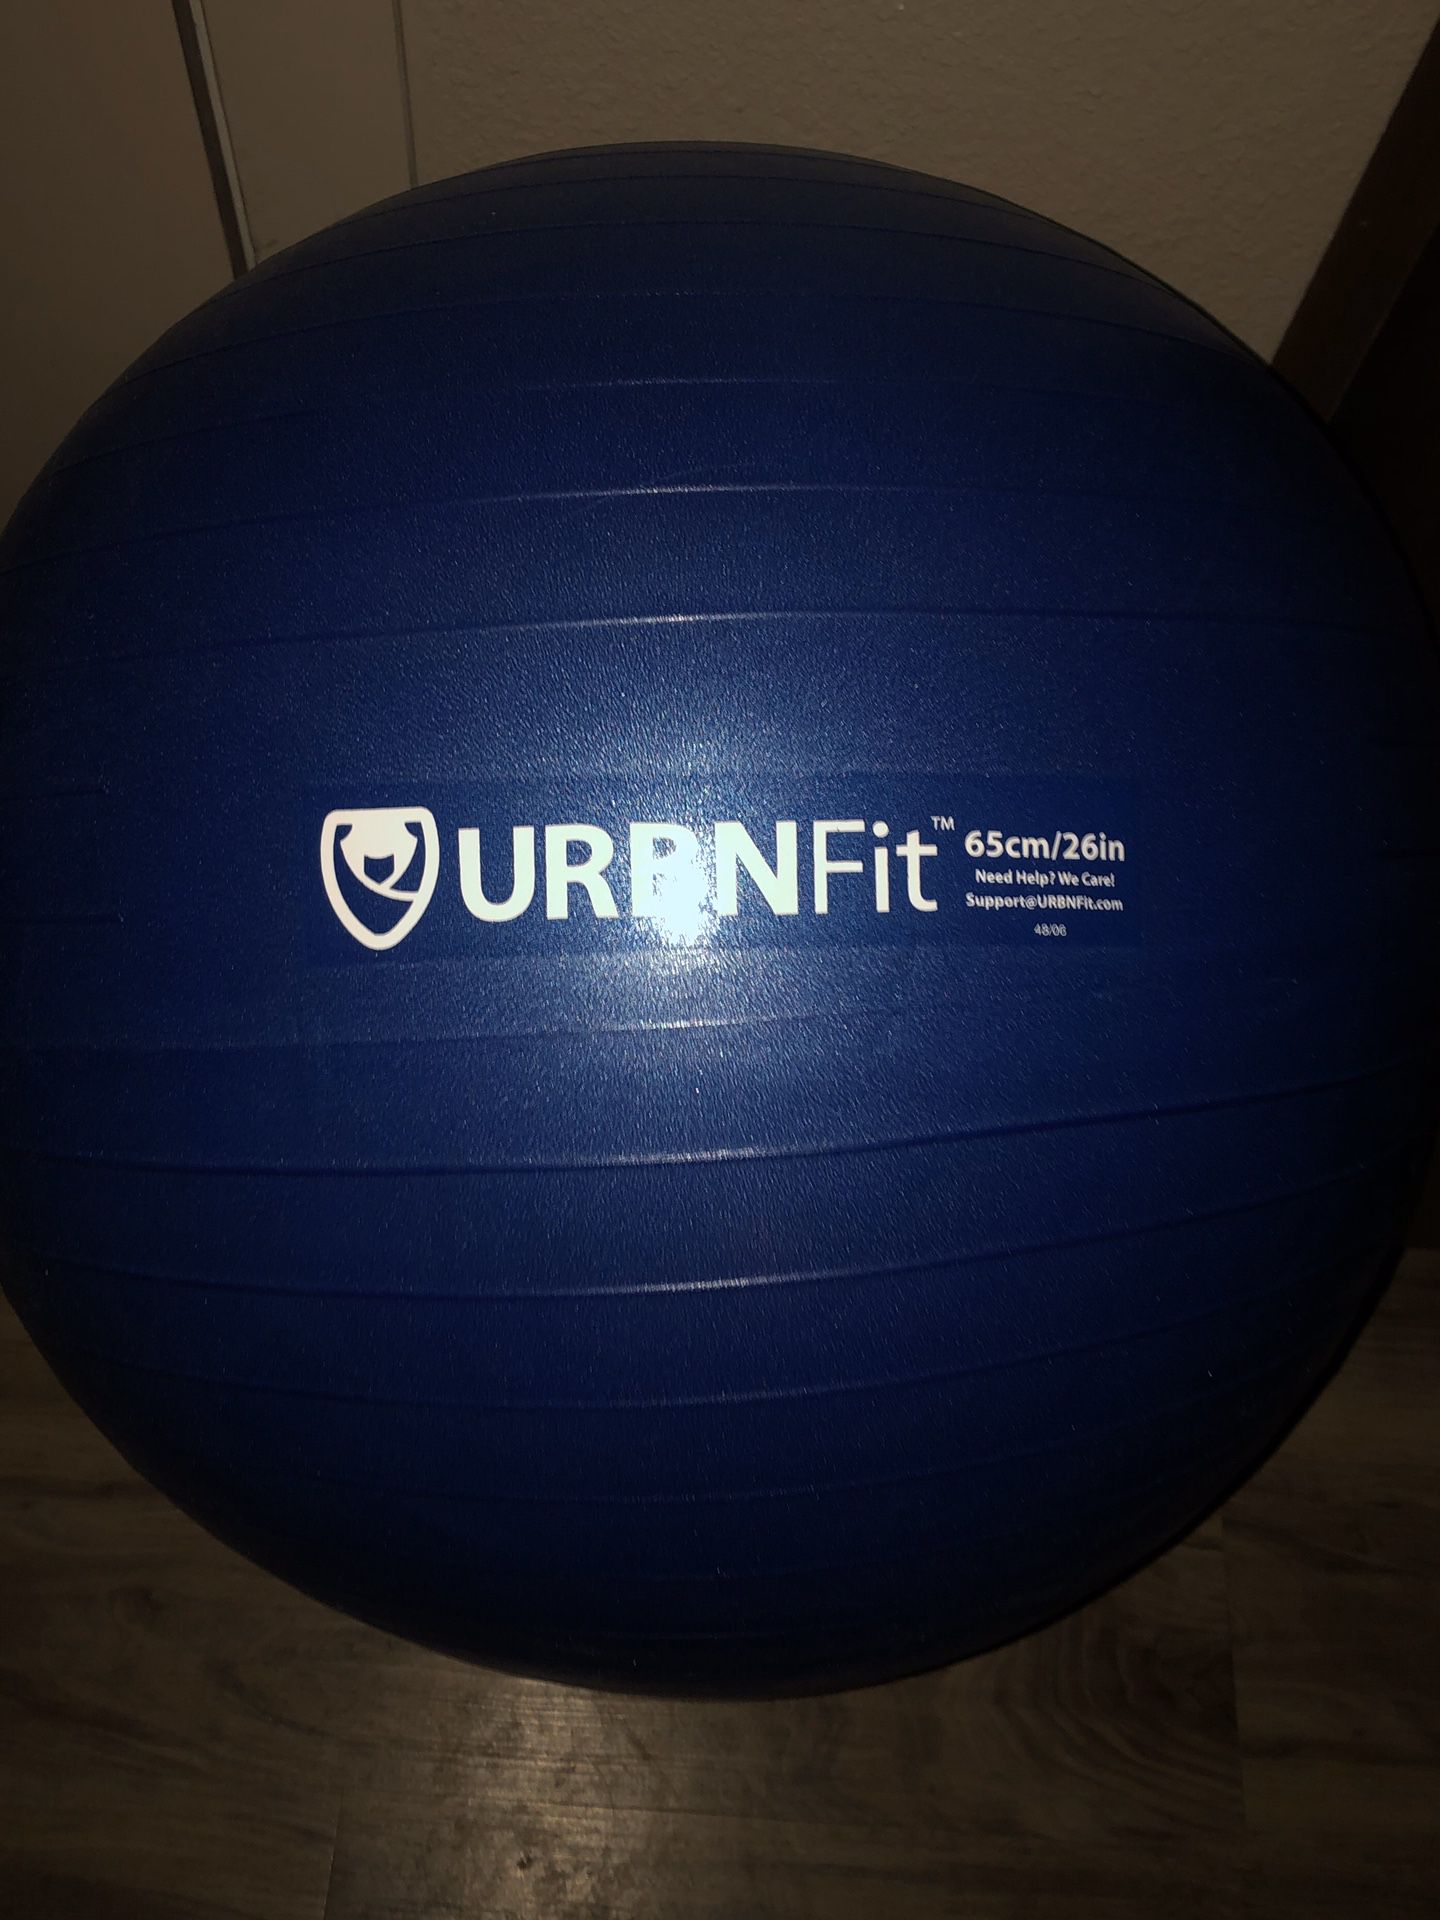 NEW URBNFIT 65” EXERCISE BALL FOR FITNESS, STABILITY, BALANCE & YOGA